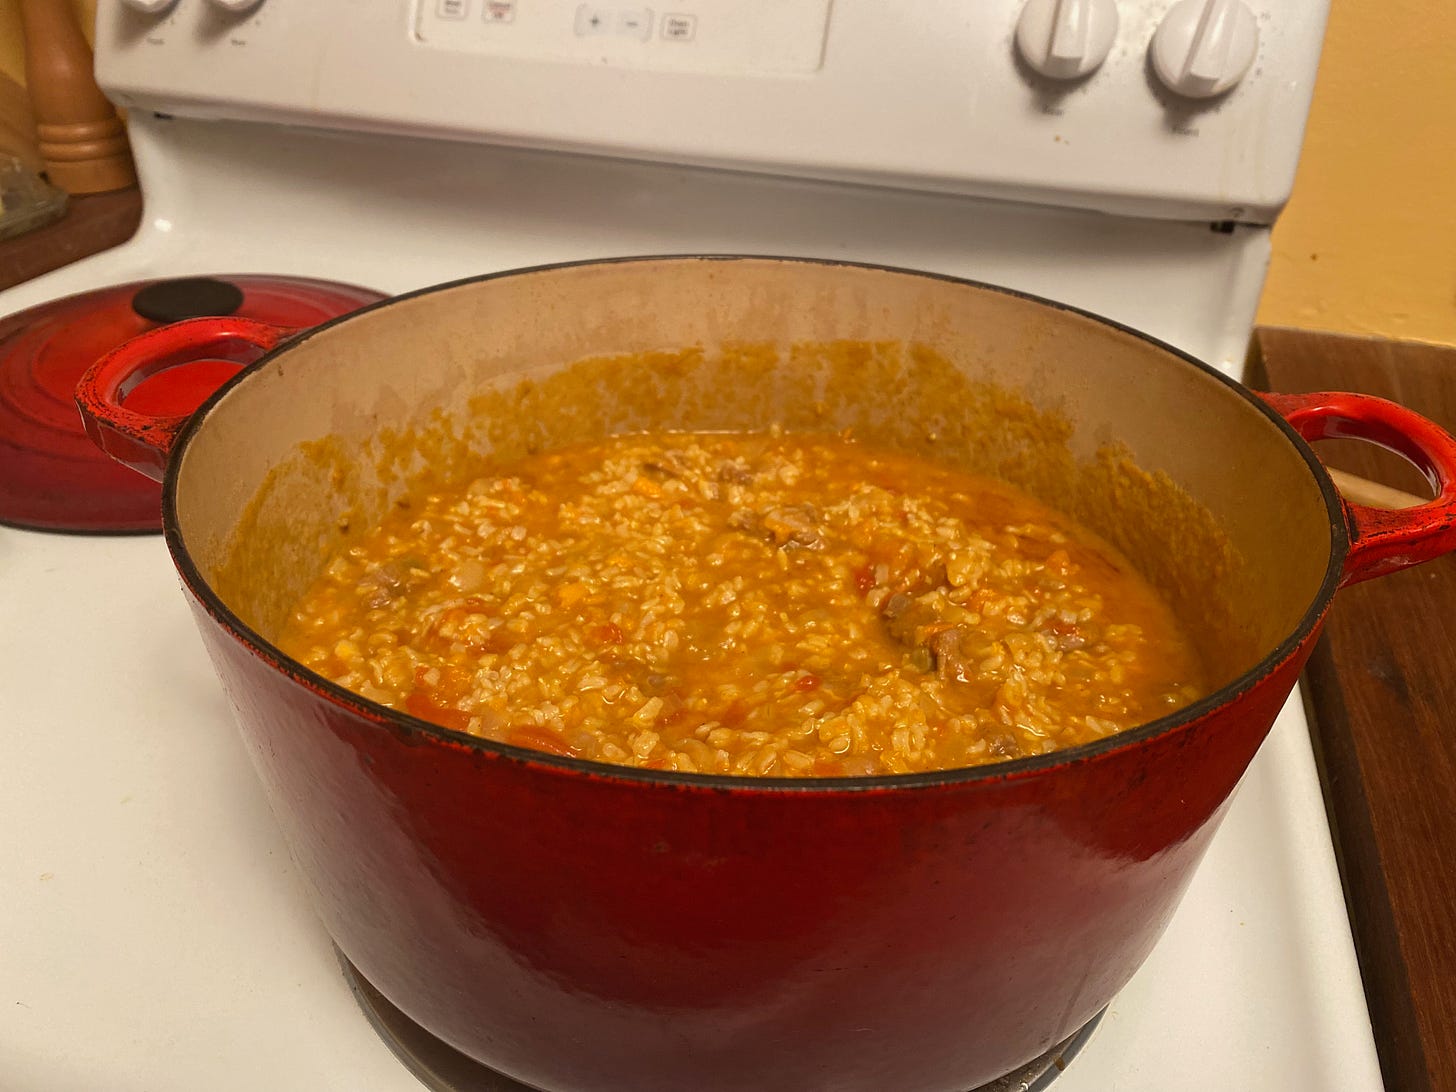 A large red Dutch oven full of lamb curry mixed with rice sits on a stove.